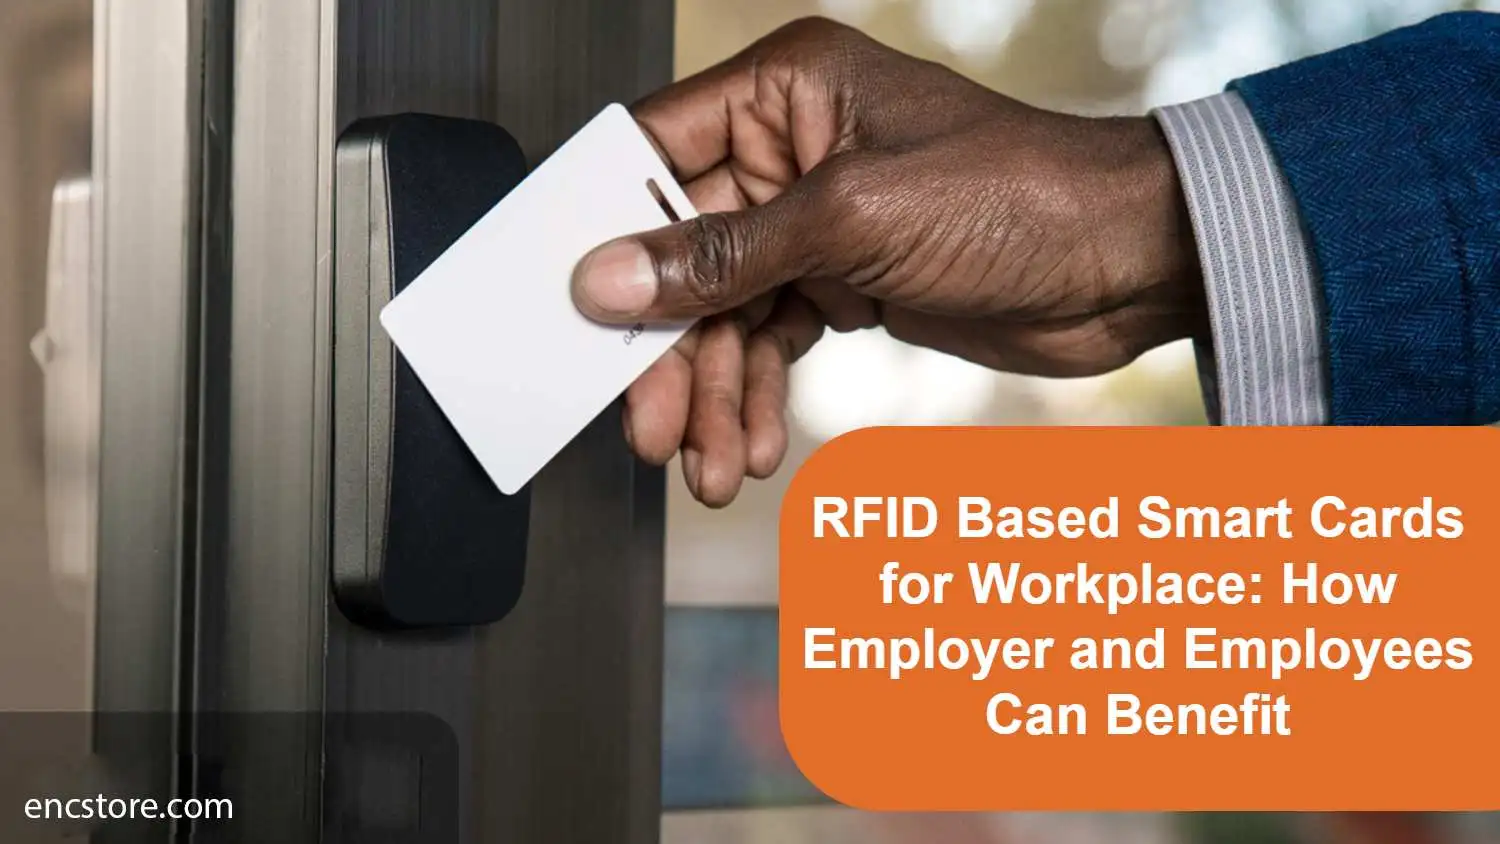 RFID Based Smart Cards for Workplace